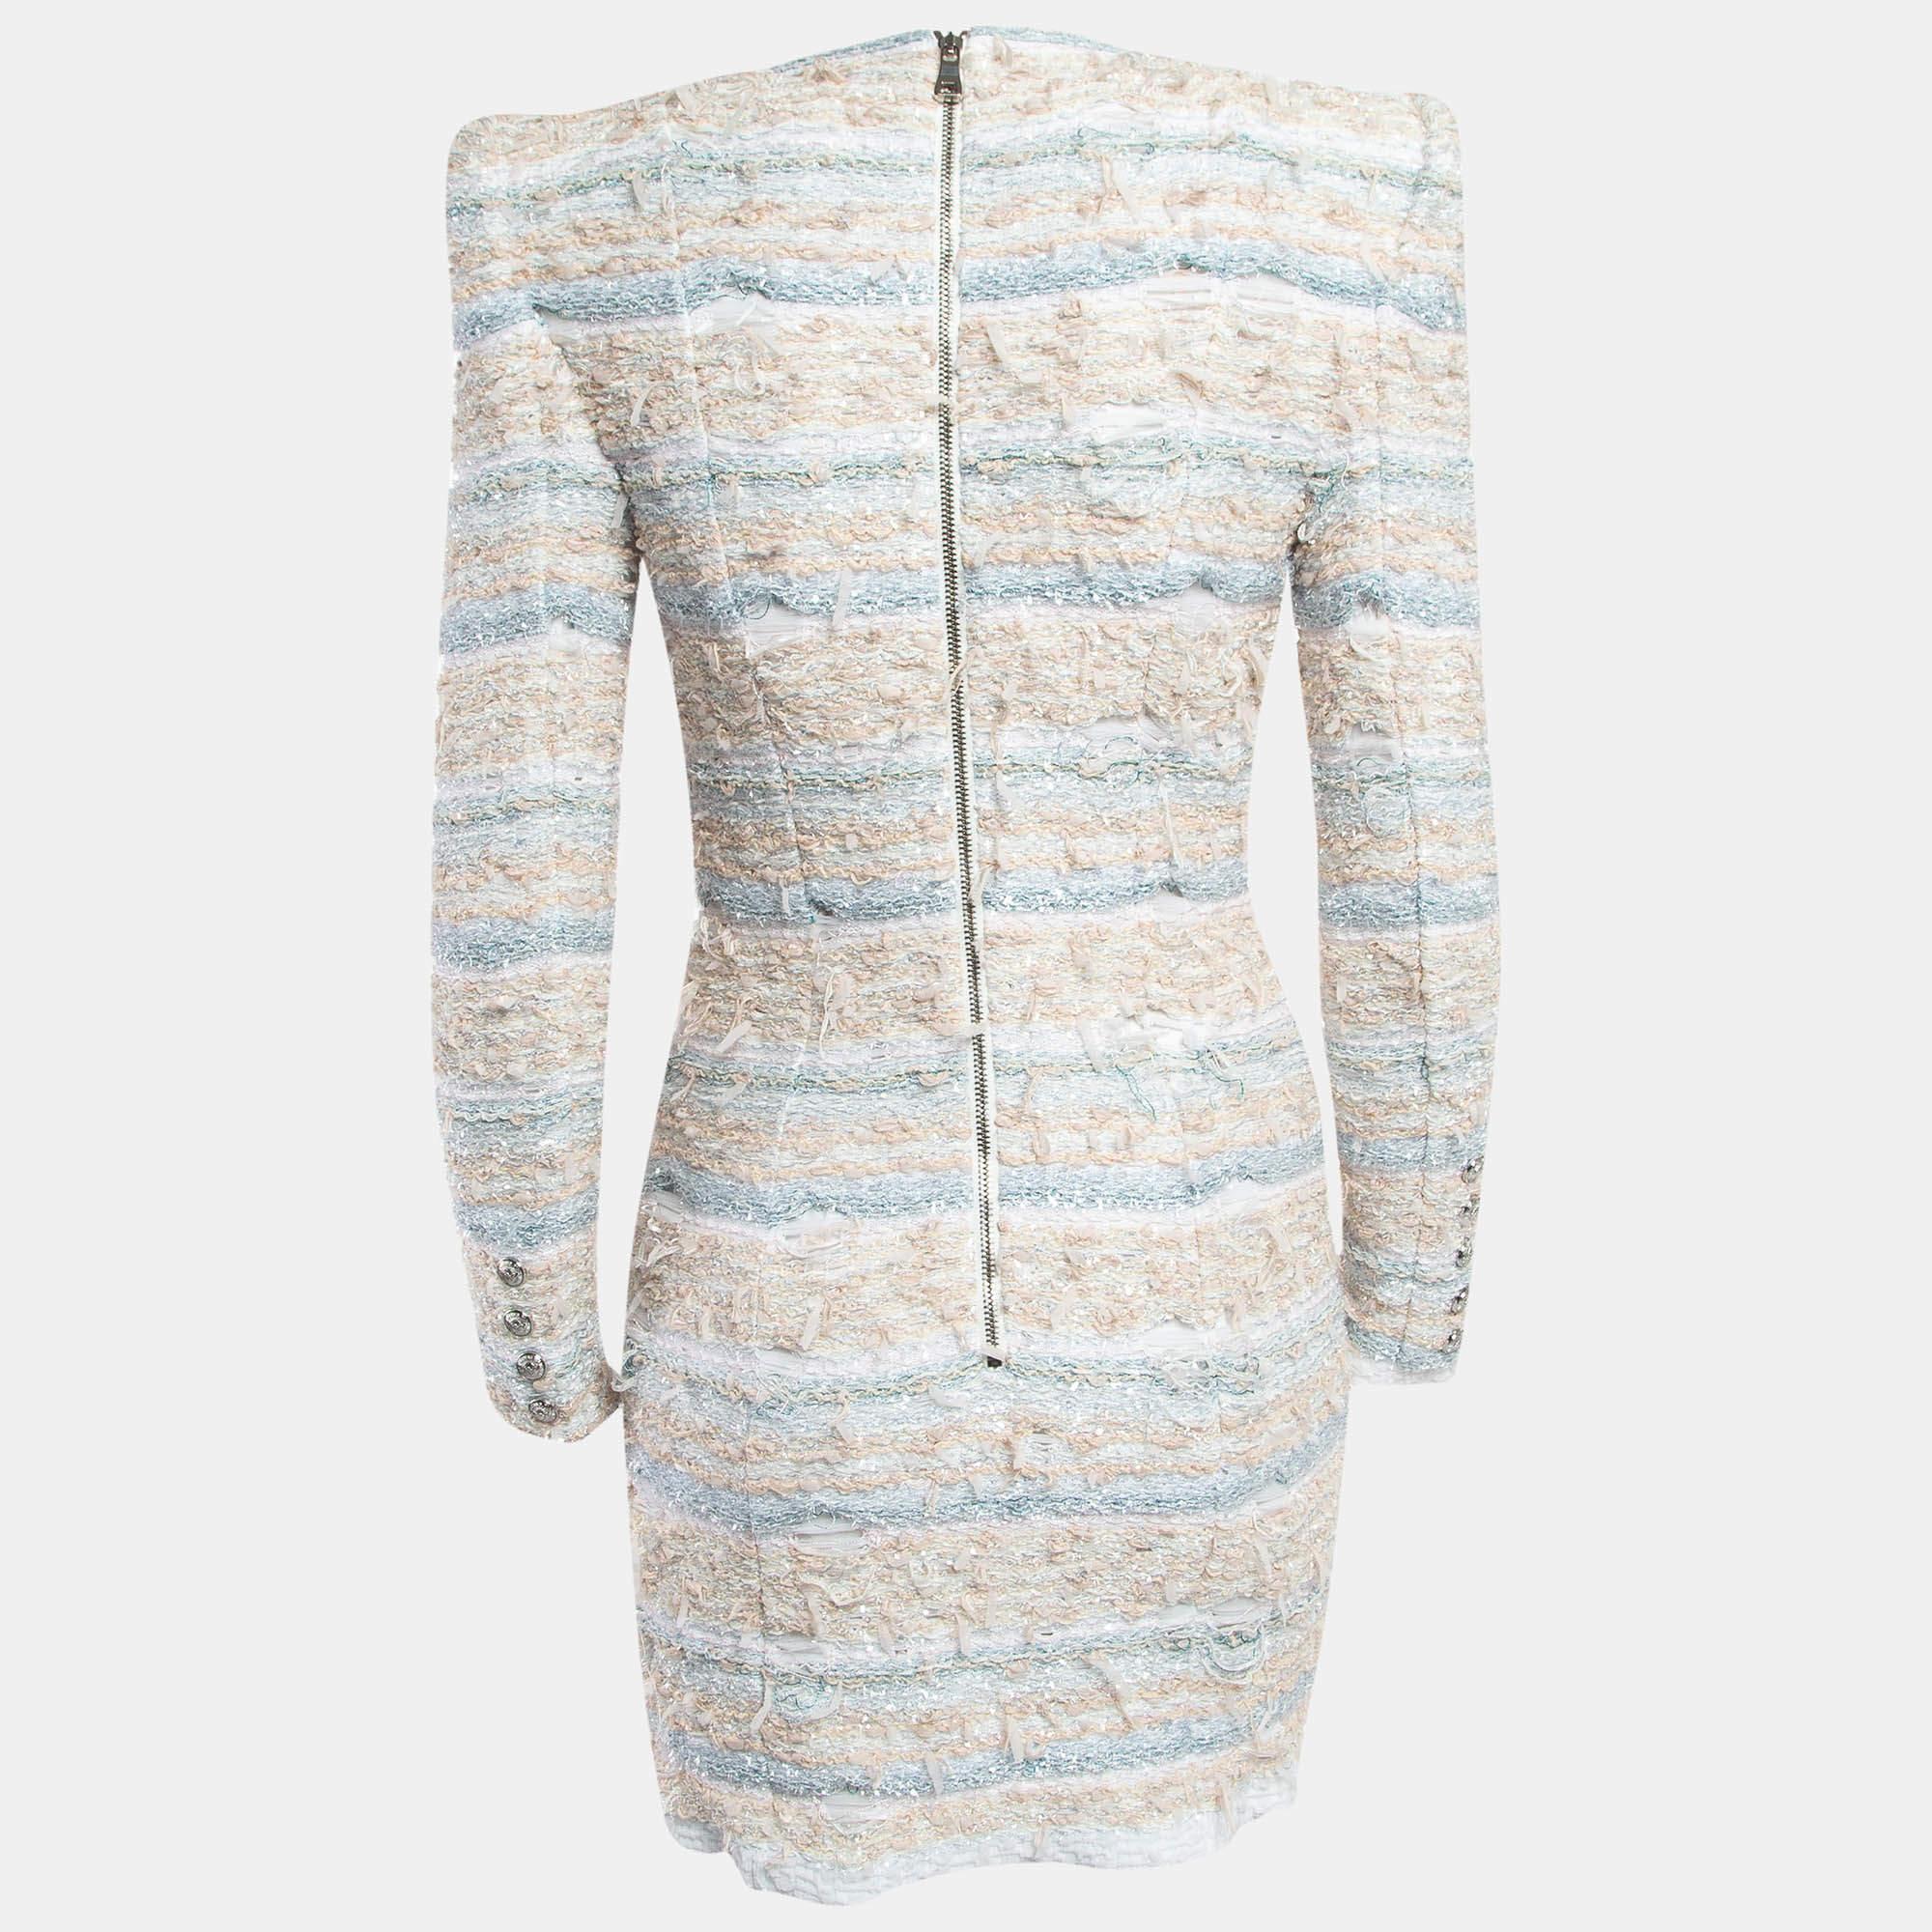 The fine artistry and the feminine silhouette of this Balmain dress exhibit the label's impeccable craftsmanship in tailoring. It is stitched using quality materials, has a good fit, and can be easily styled with chic accessories, open-toe sandals,